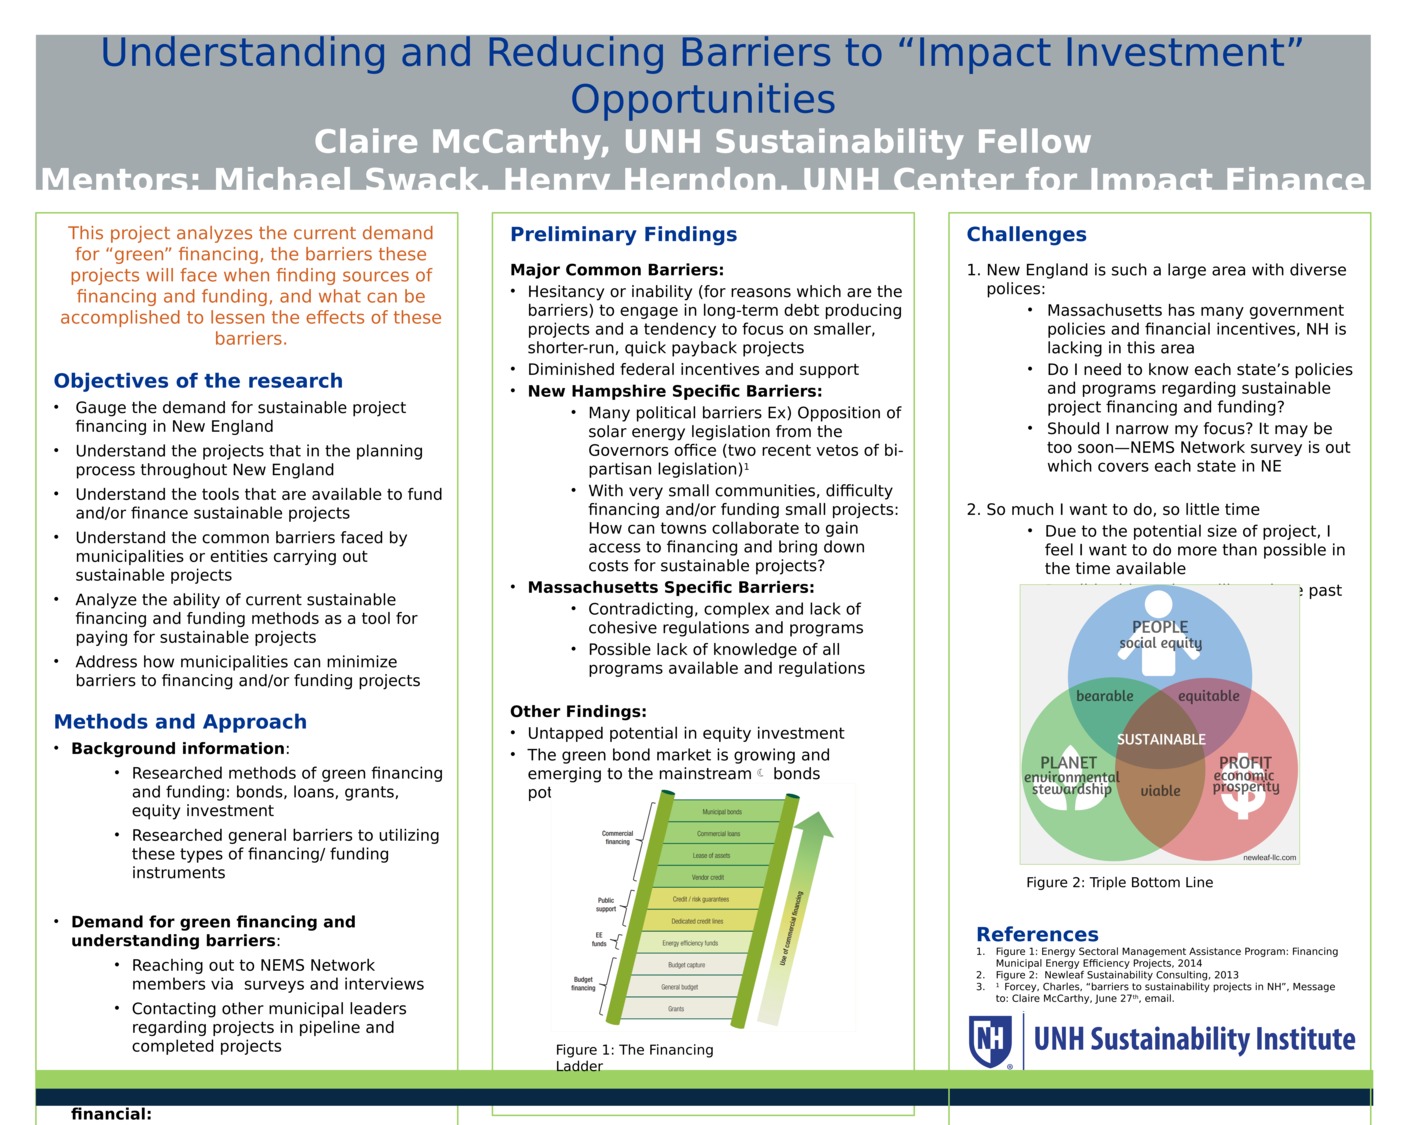 Understanding And Reducing Barriers To "Impact Investment" Opportunities by Cm18